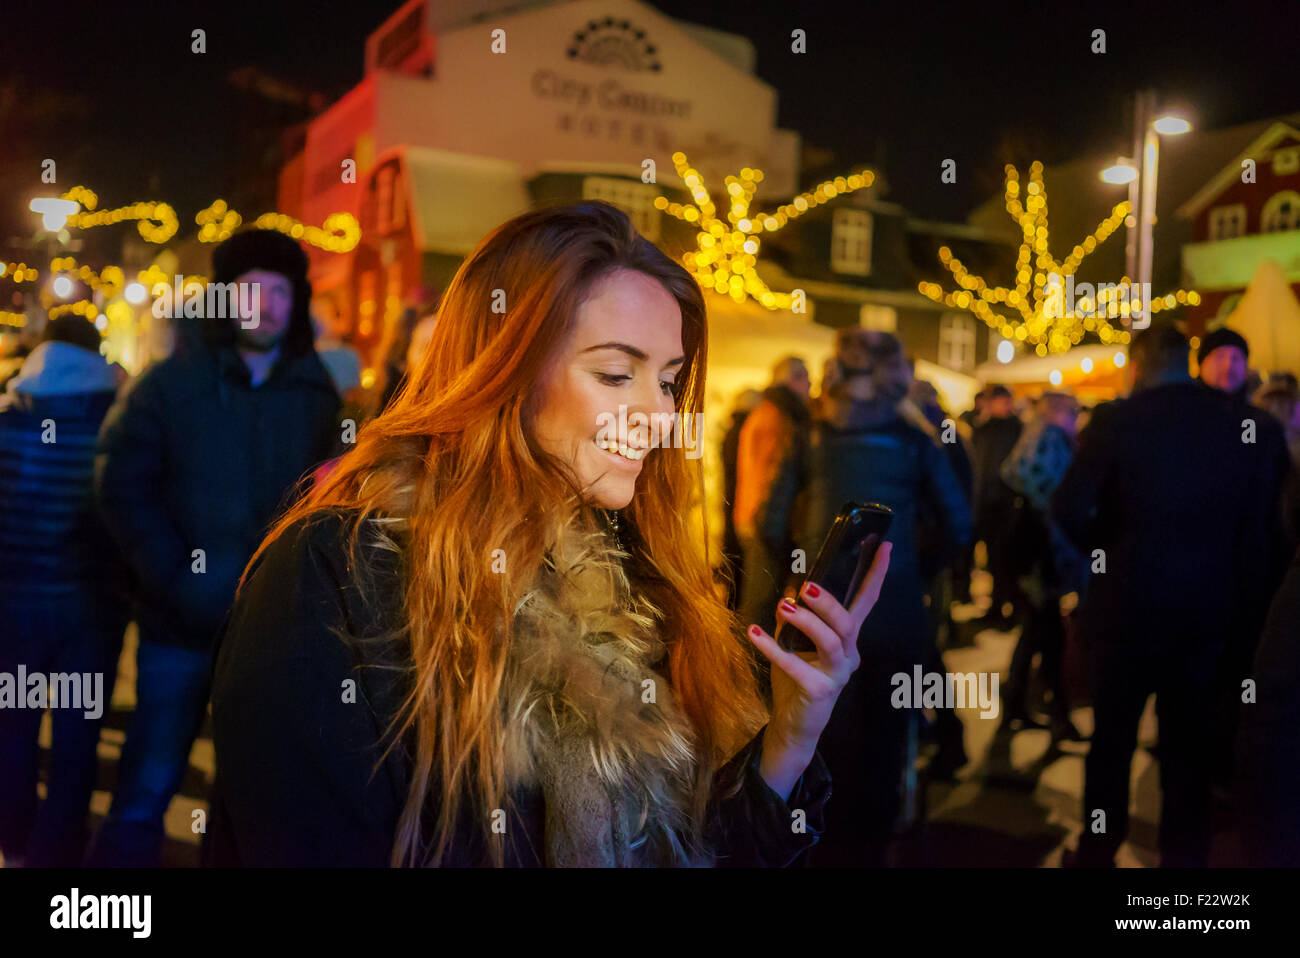 Woman looking at her smartphone, Christmas Market, Iceland Stock Photo